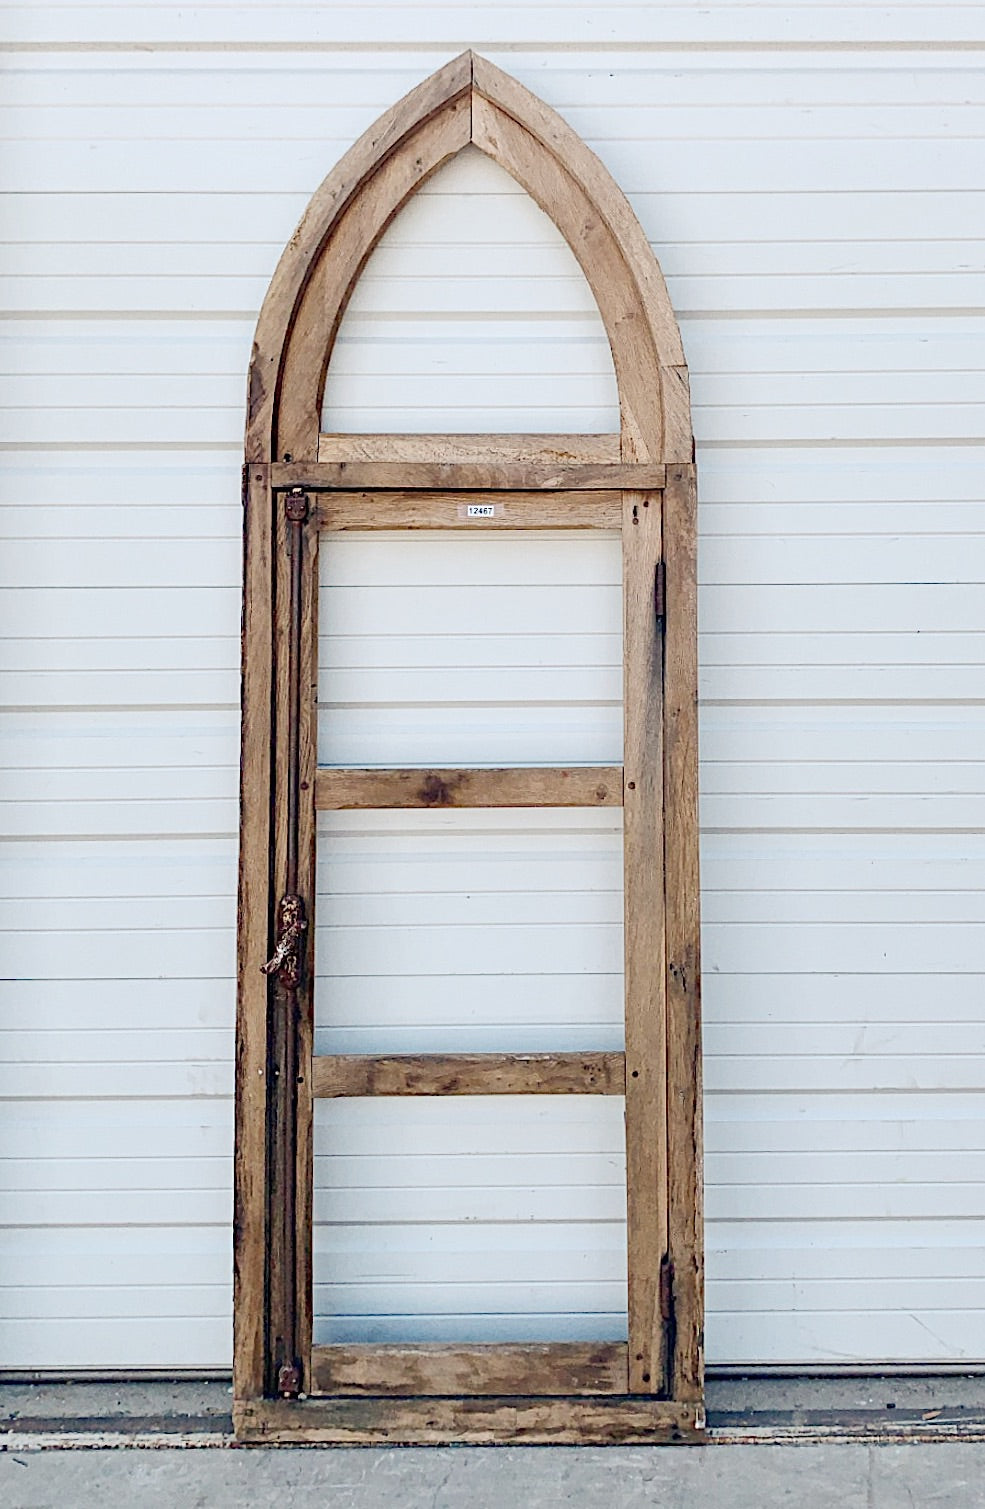 Arched 4 Pane Gothic Style Natural Wood Window Frame (no glass)